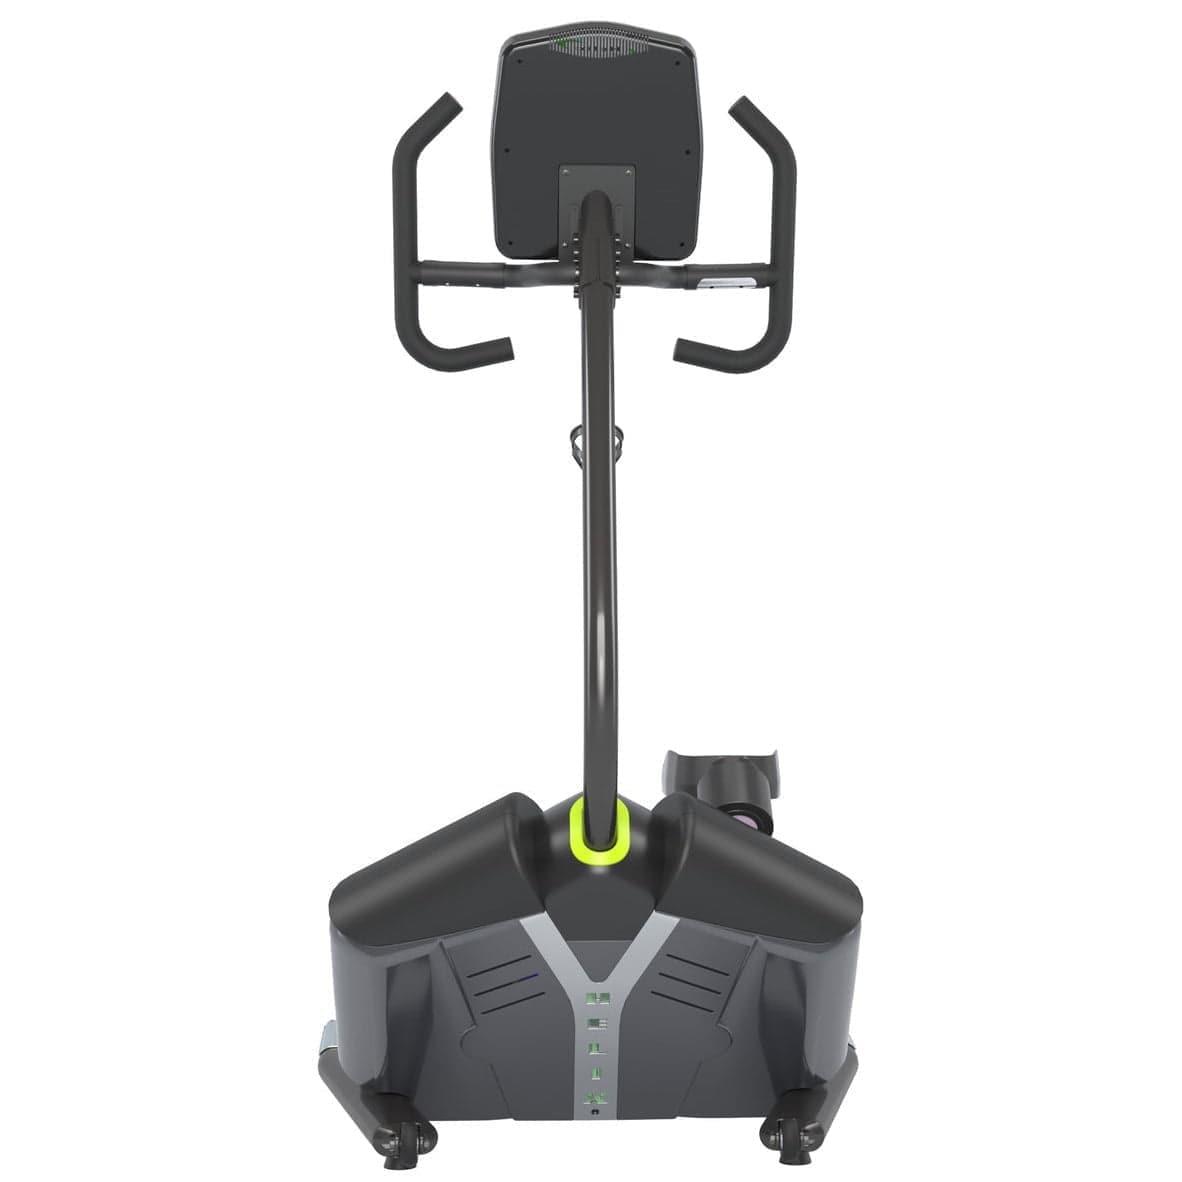 Helix 3D Lateral Trainer HLT3500-3D Lateral Trainer Helix 